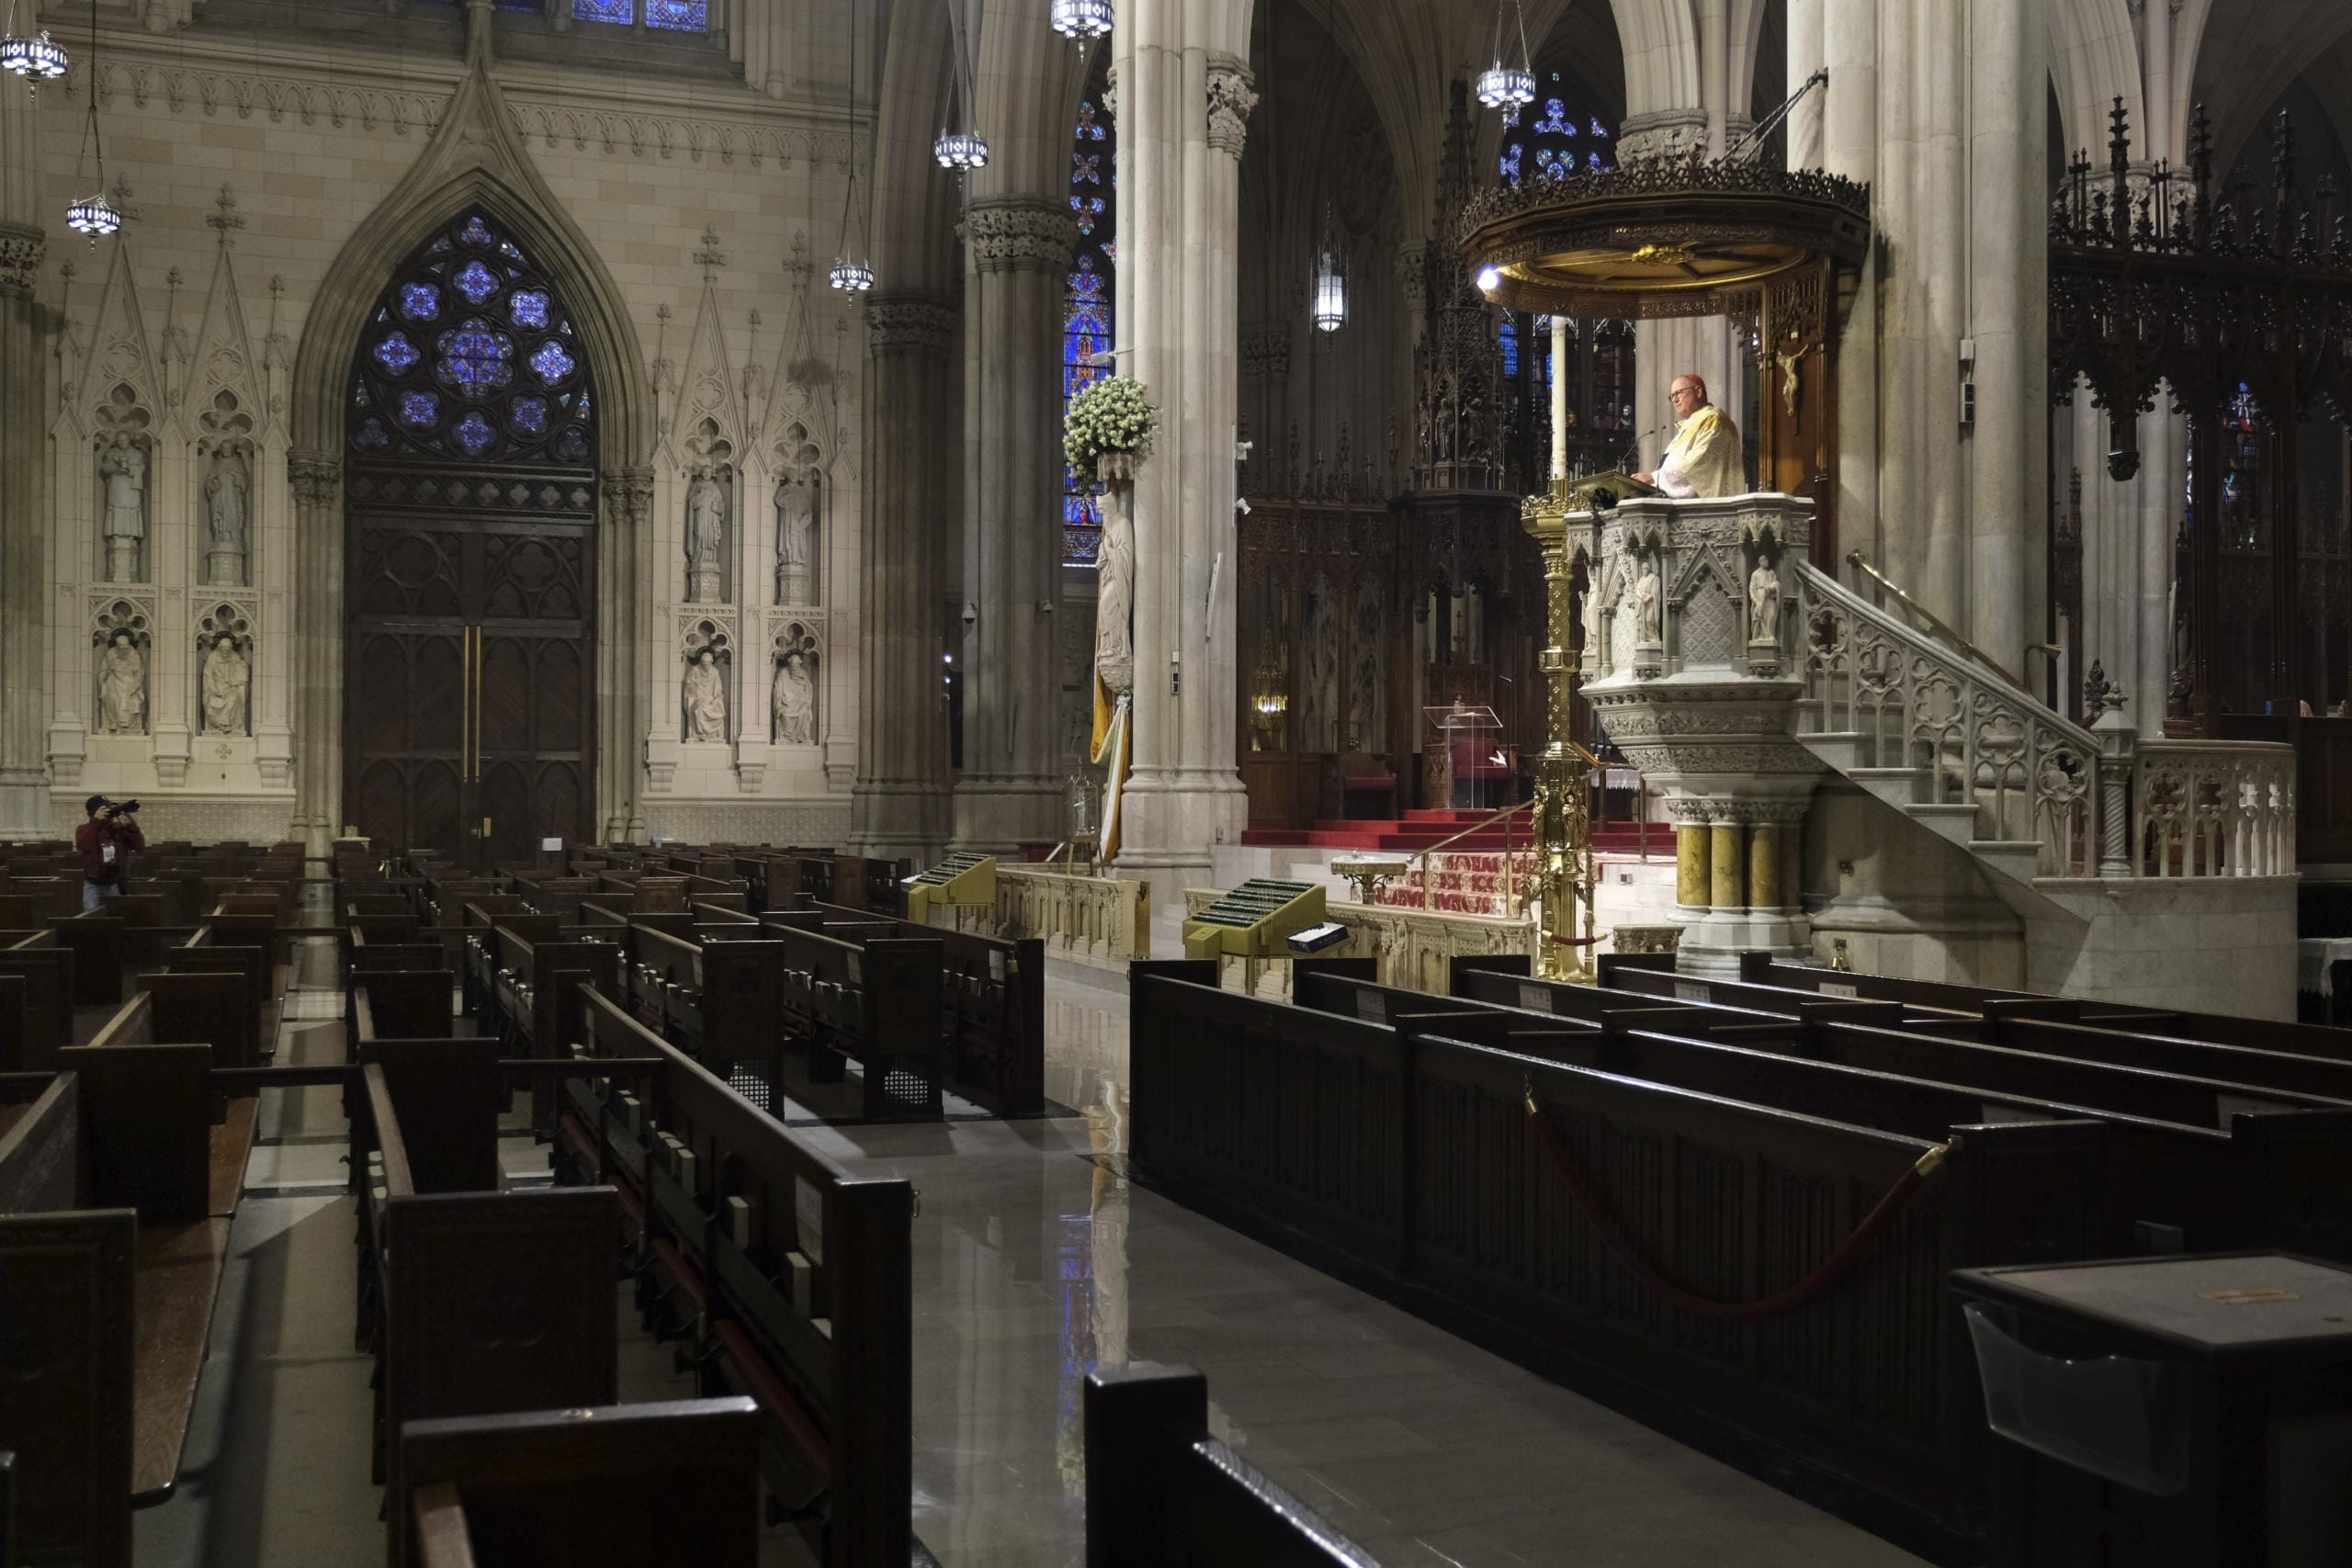 Archbishop Timothy Dolan, right, delivers his homily over empty pews as he leads an Easter Mass at St. Patrick's Cathedral in New York, Sunday, April 12, 2020. Due to coronavirus concerns, no congregants were allowed to attend the Mass but it was broadcast live on a local TV station.